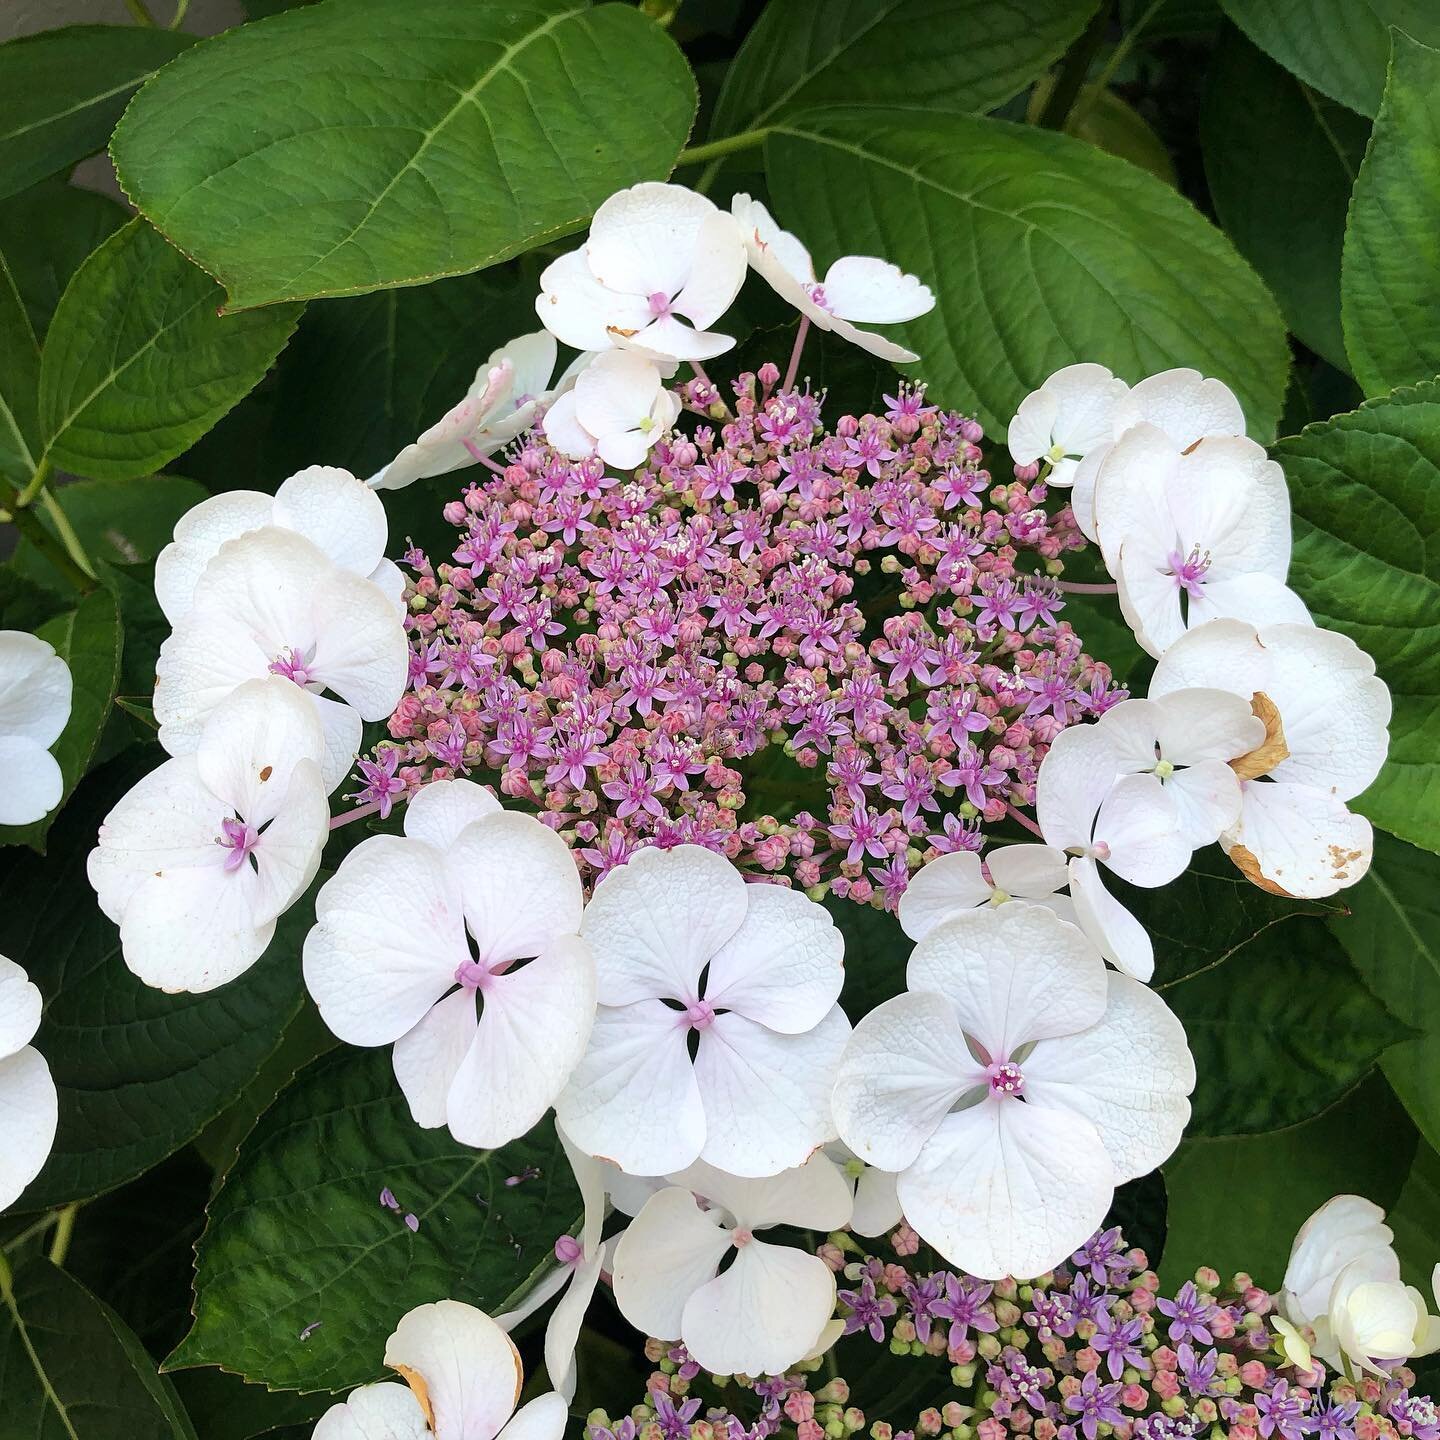 Lacecap Hydrangeas (Hydrangea macrophylla normalis)

This cultivar is the same species as the mophead hydrangea (Hydrangea macrophylla) and both types require the same growing environment. They have small fertile flower buds in the center, with showy